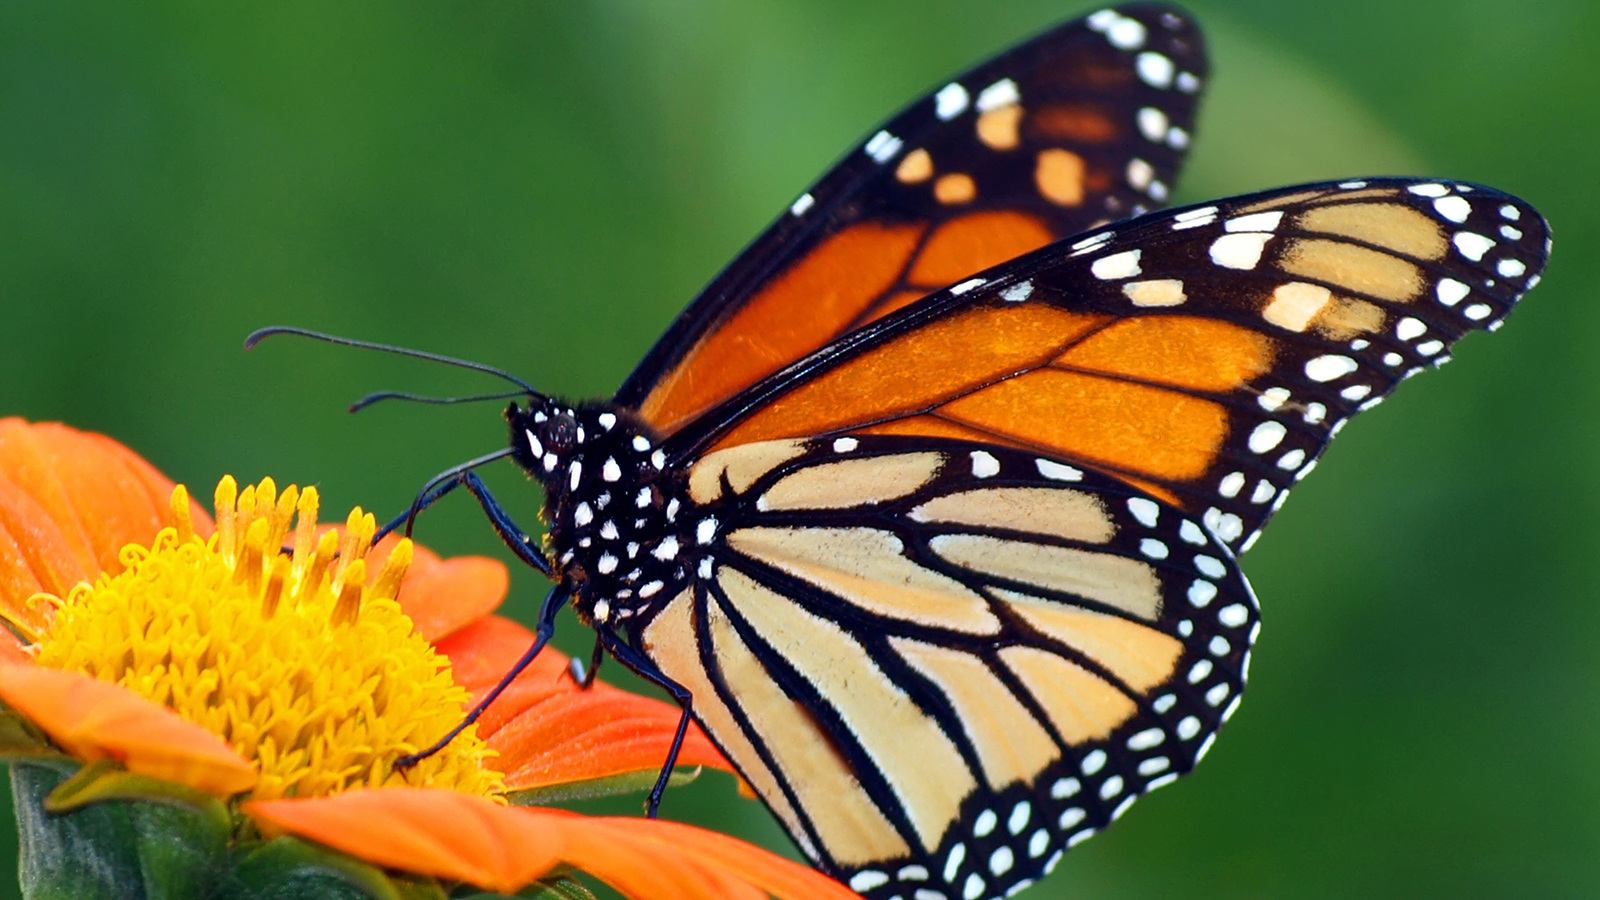 Amazing Butterfly Pictures & Backgrounds - Monarch Butterfly - HD Wallpaper 